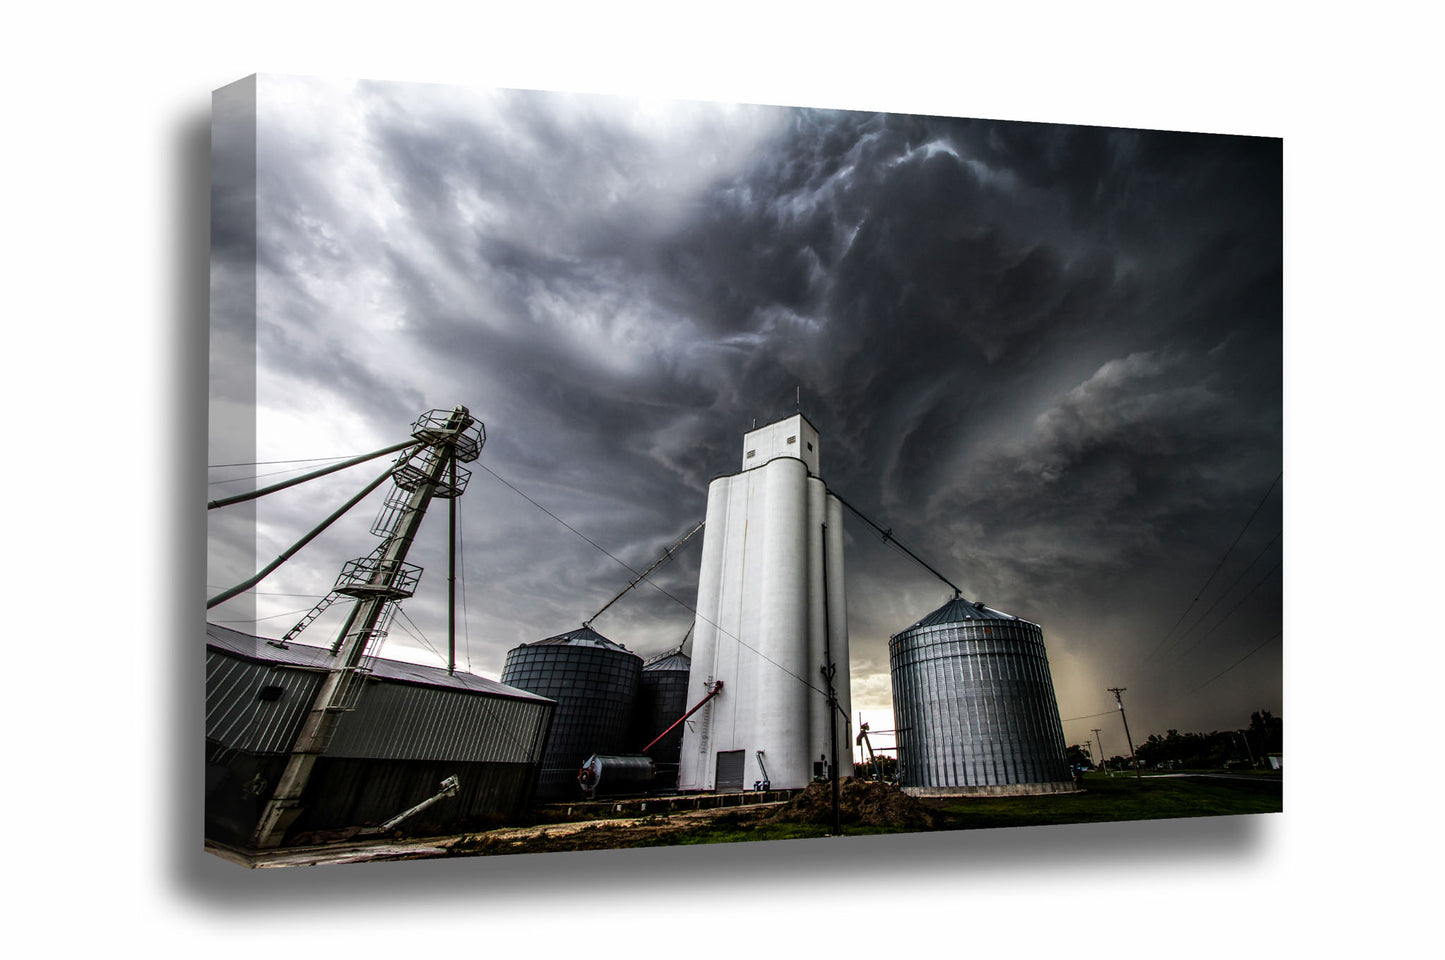 Canvas wall art of storm clouds swirling dramatically over a grain elevator in a small town in Kansas by Sean Ramsey of Southern Plains Photography.